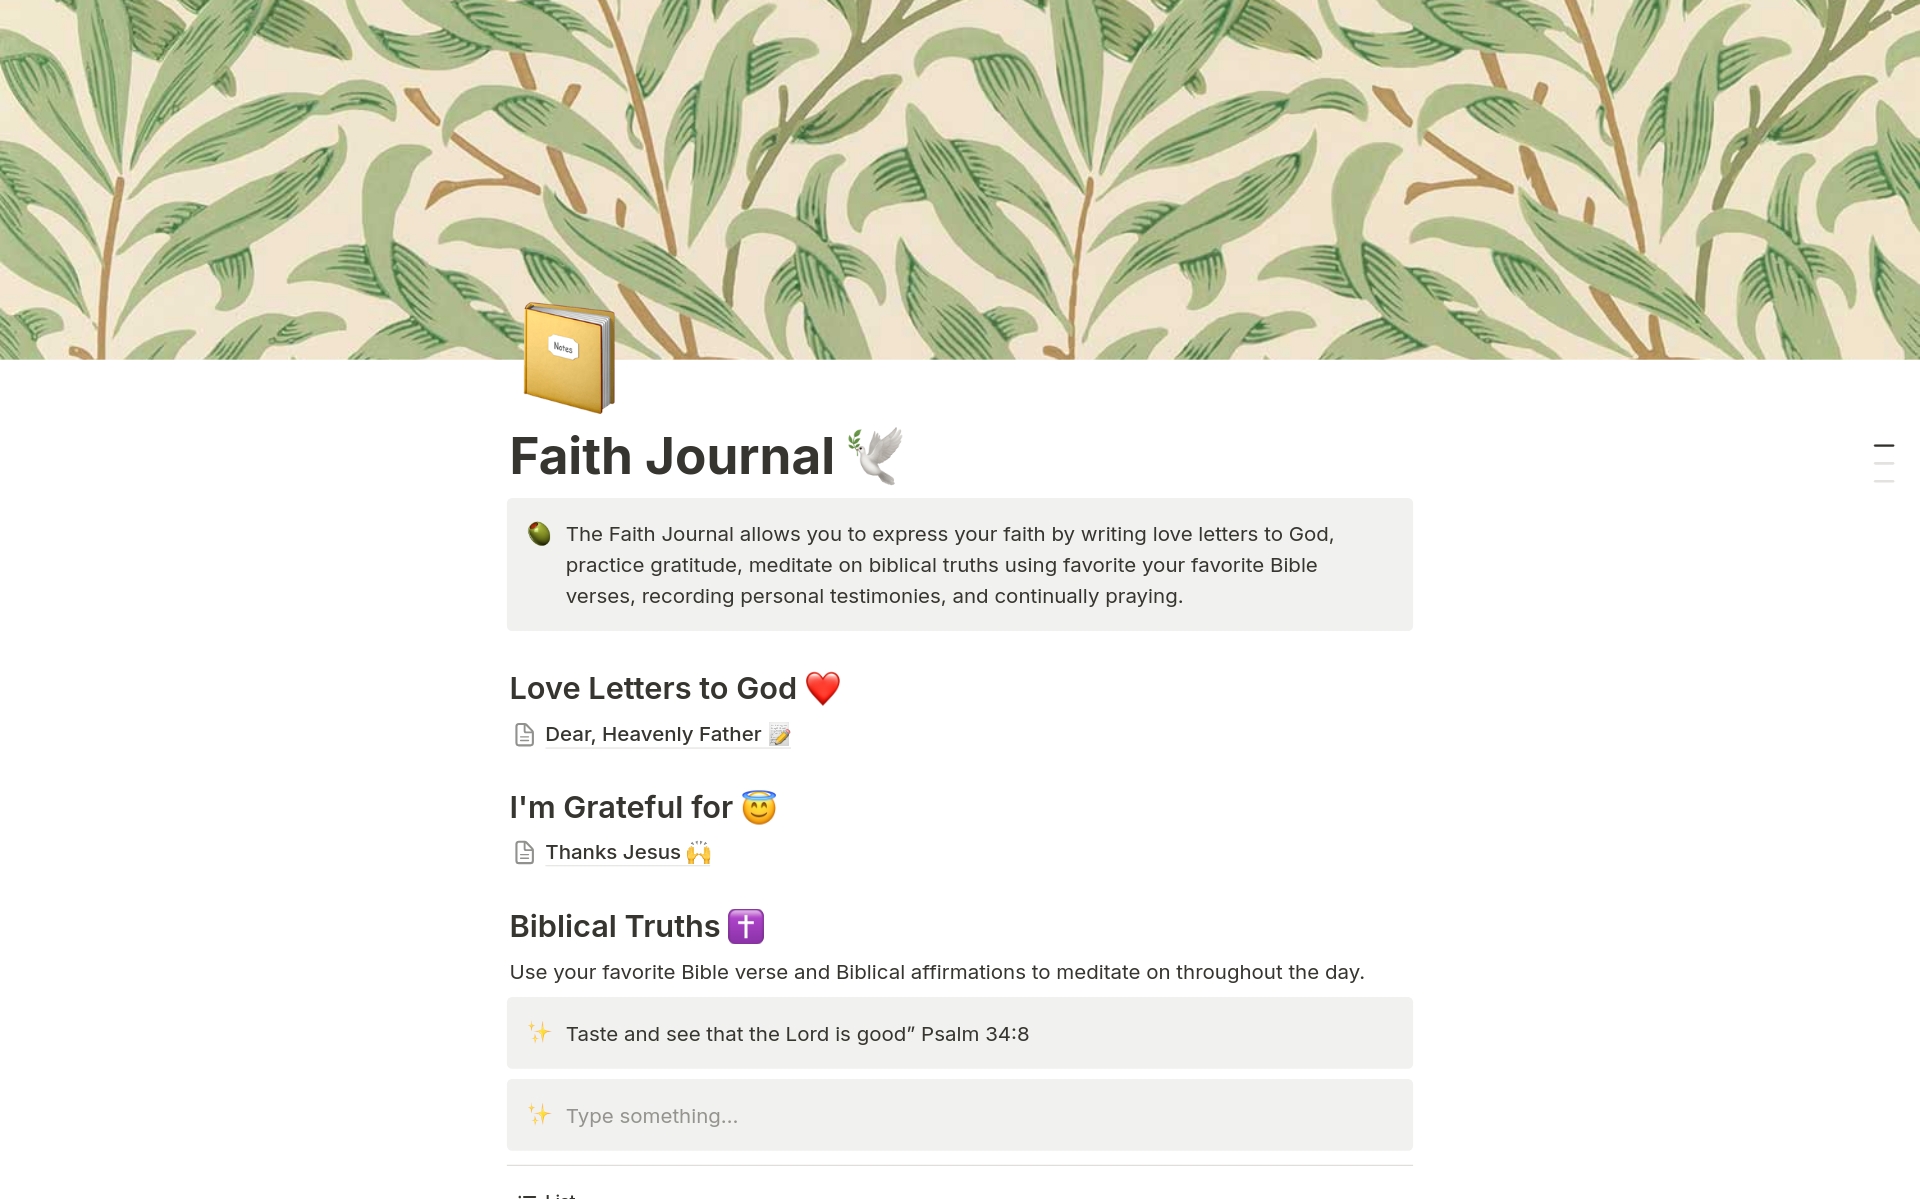 Grow your relationship with Christ through journaling your faith.